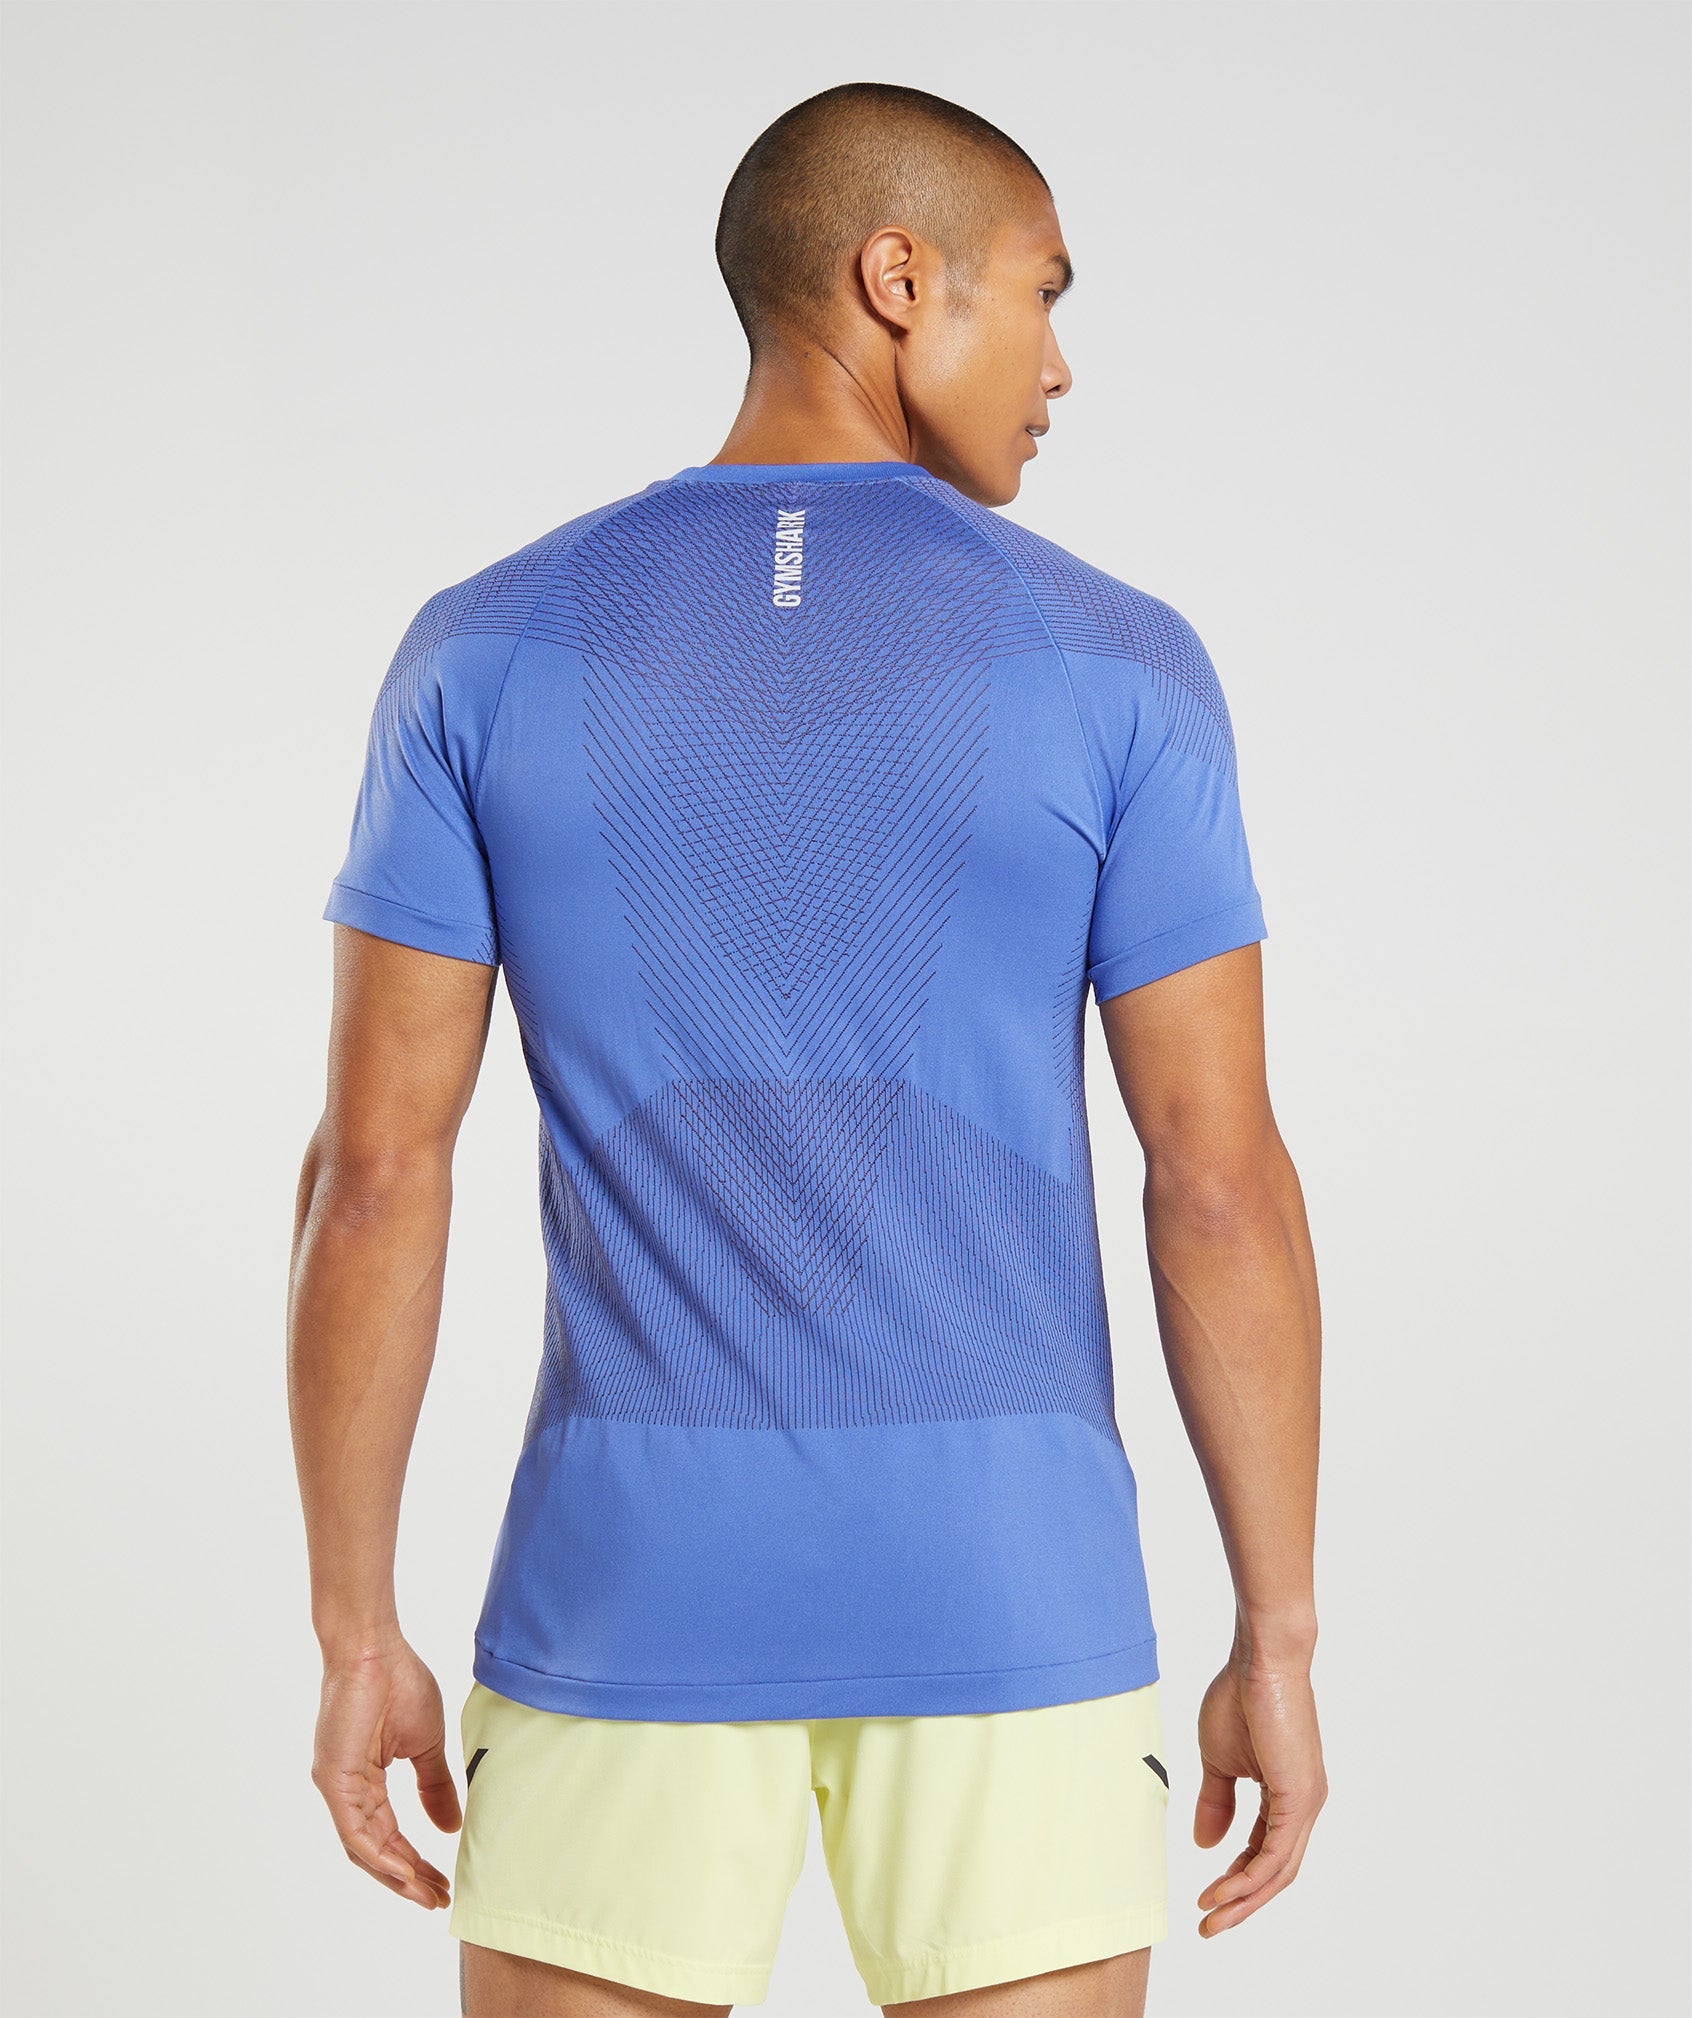 Apex Seamless T-Shirt in Court Blue/Onyx Grey - view 2